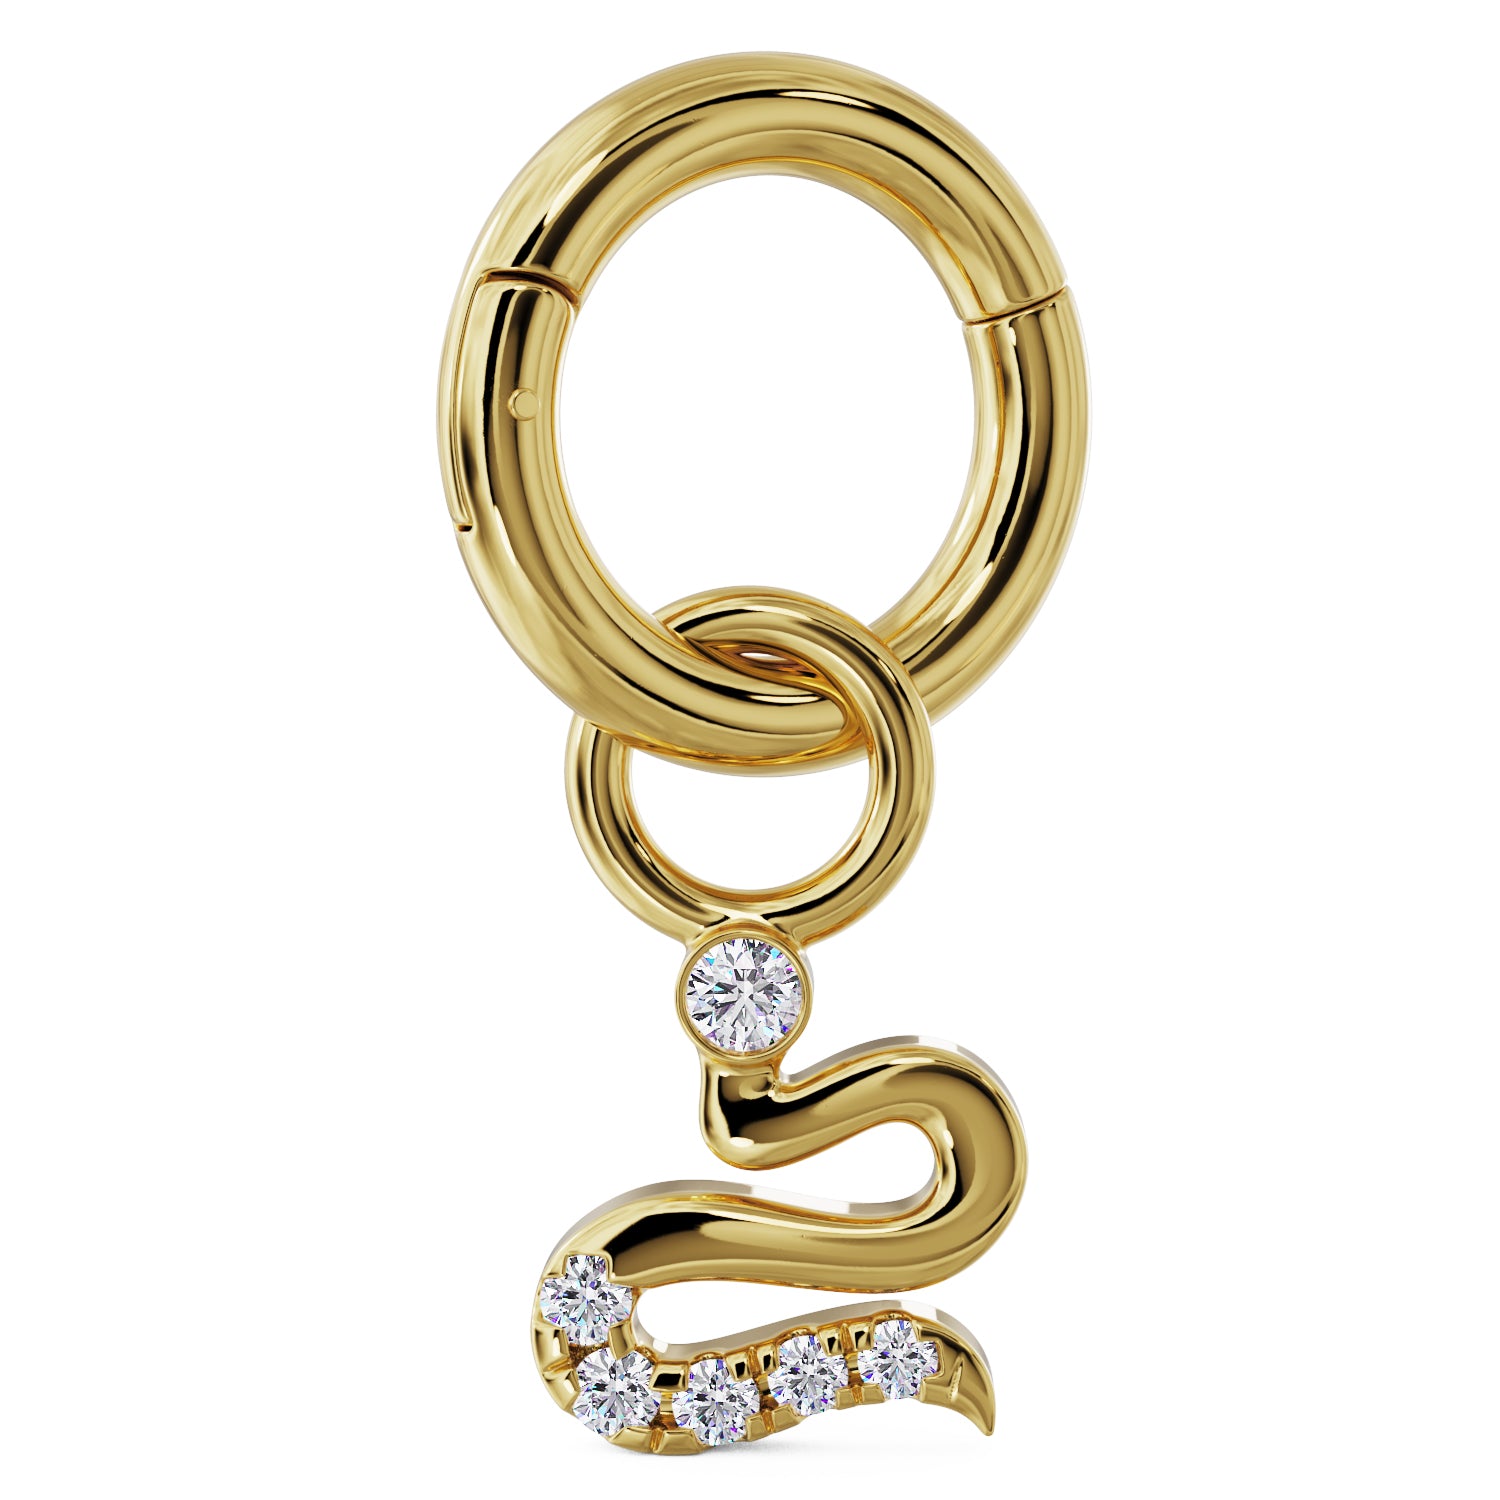 Clicker Ring & Diamond Snake Charm Accessory for Piercing Jewelry